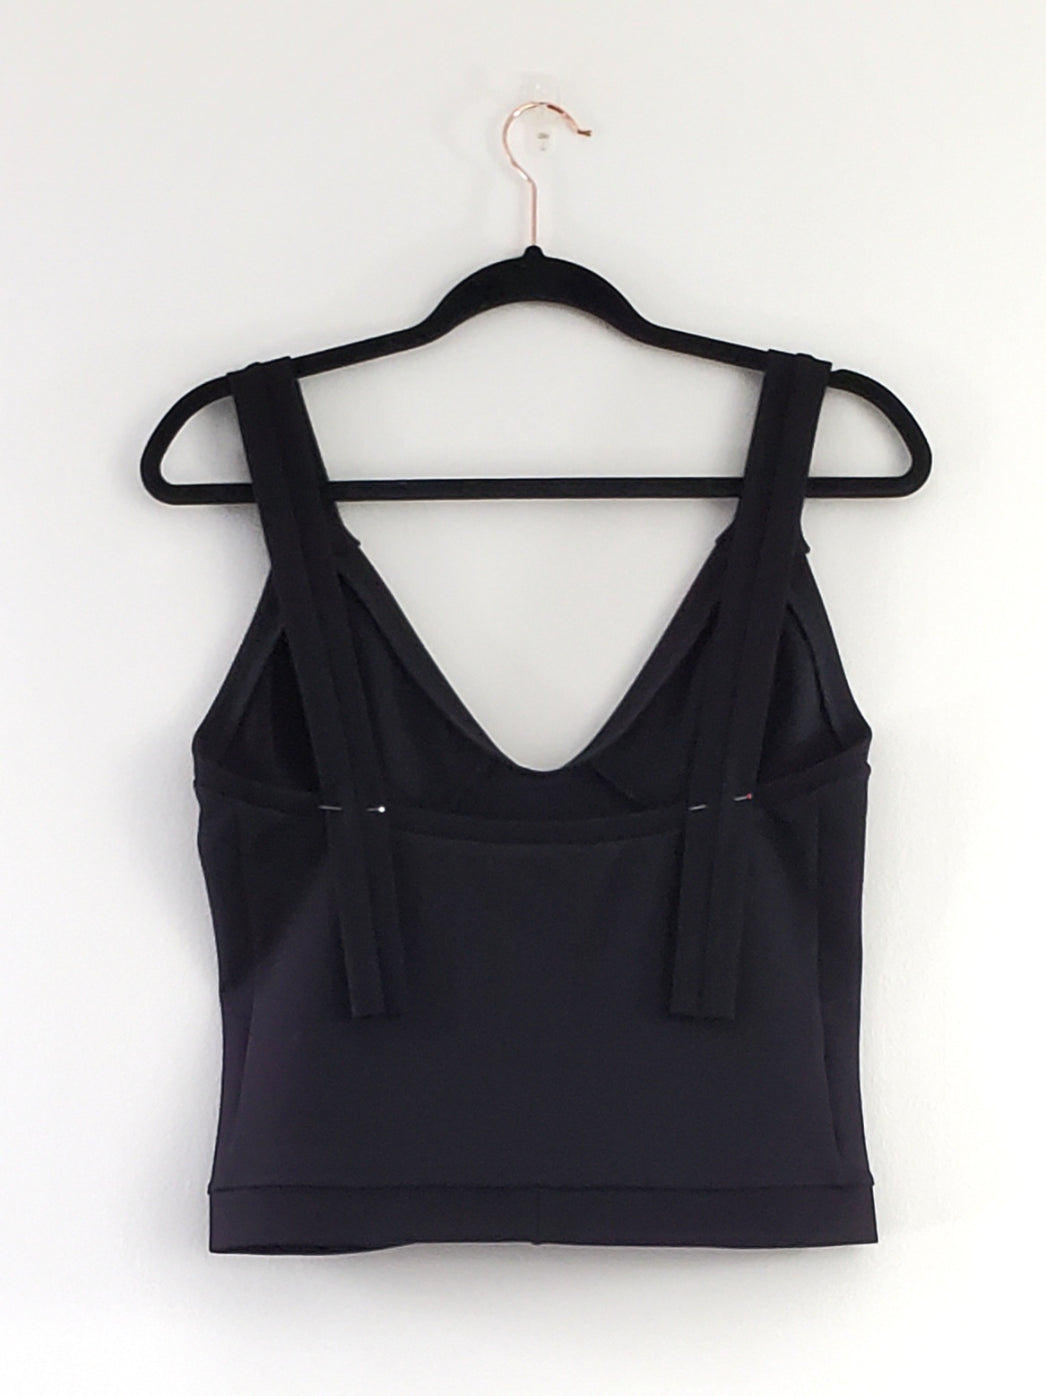 CM Black Ponte Tank with Darted Bust (M/L up to C cup) - 1of1